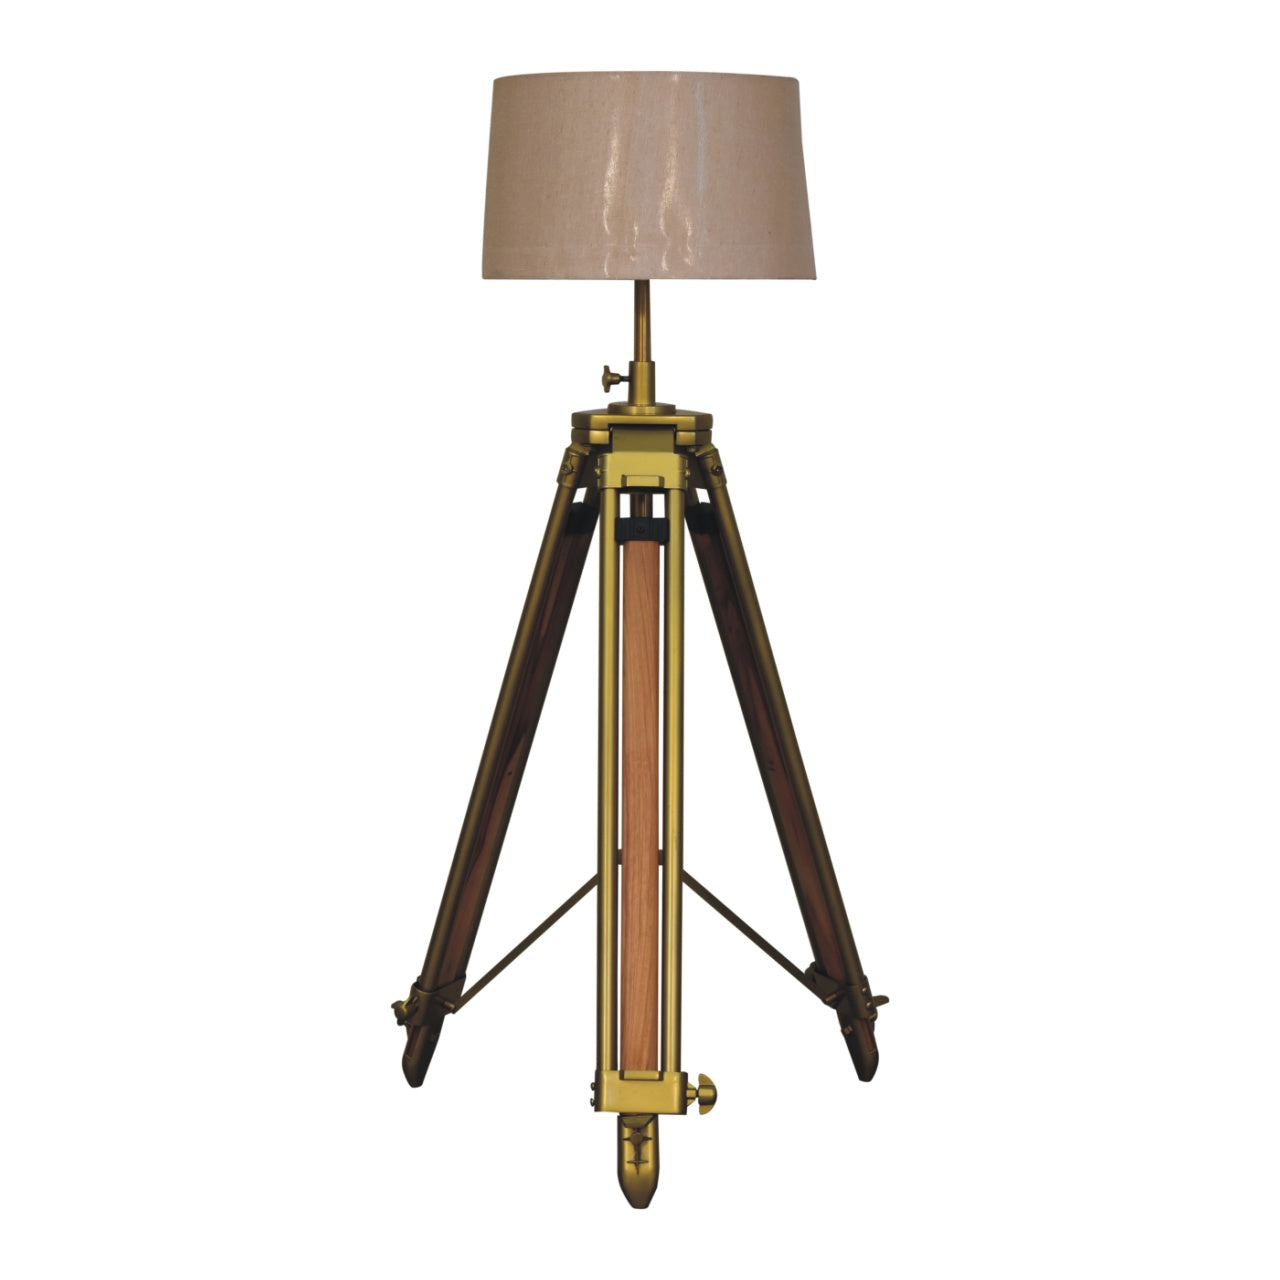 View Brass Plated and Wooden Floor Lamp information